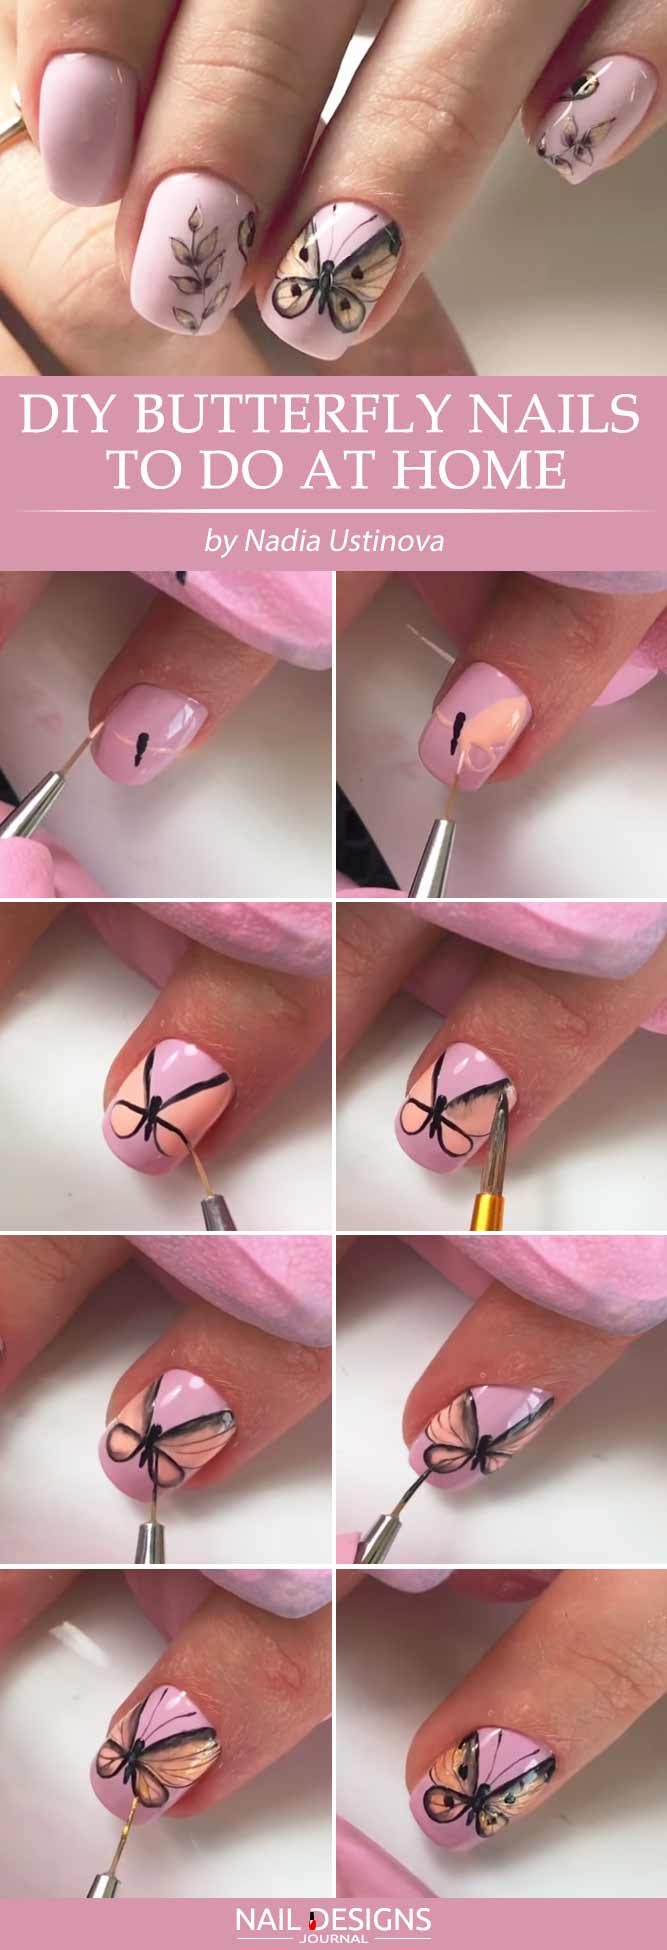 DIY Butterfly Nails To Do At Home #handpaintednails #shortnails #pinknails